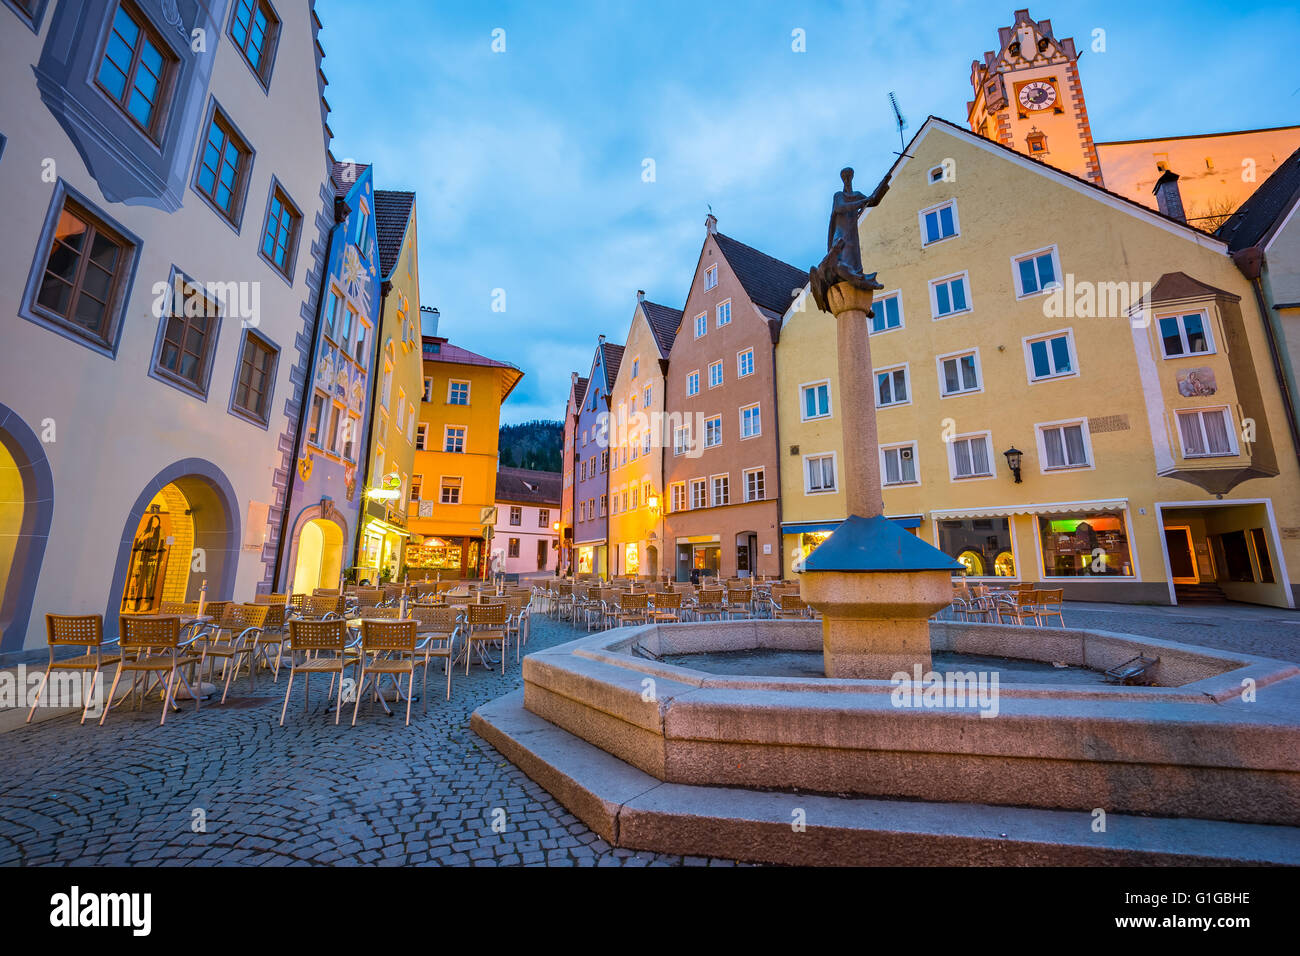 Fussen town at night in Bavaria, Germany. Stock Photo